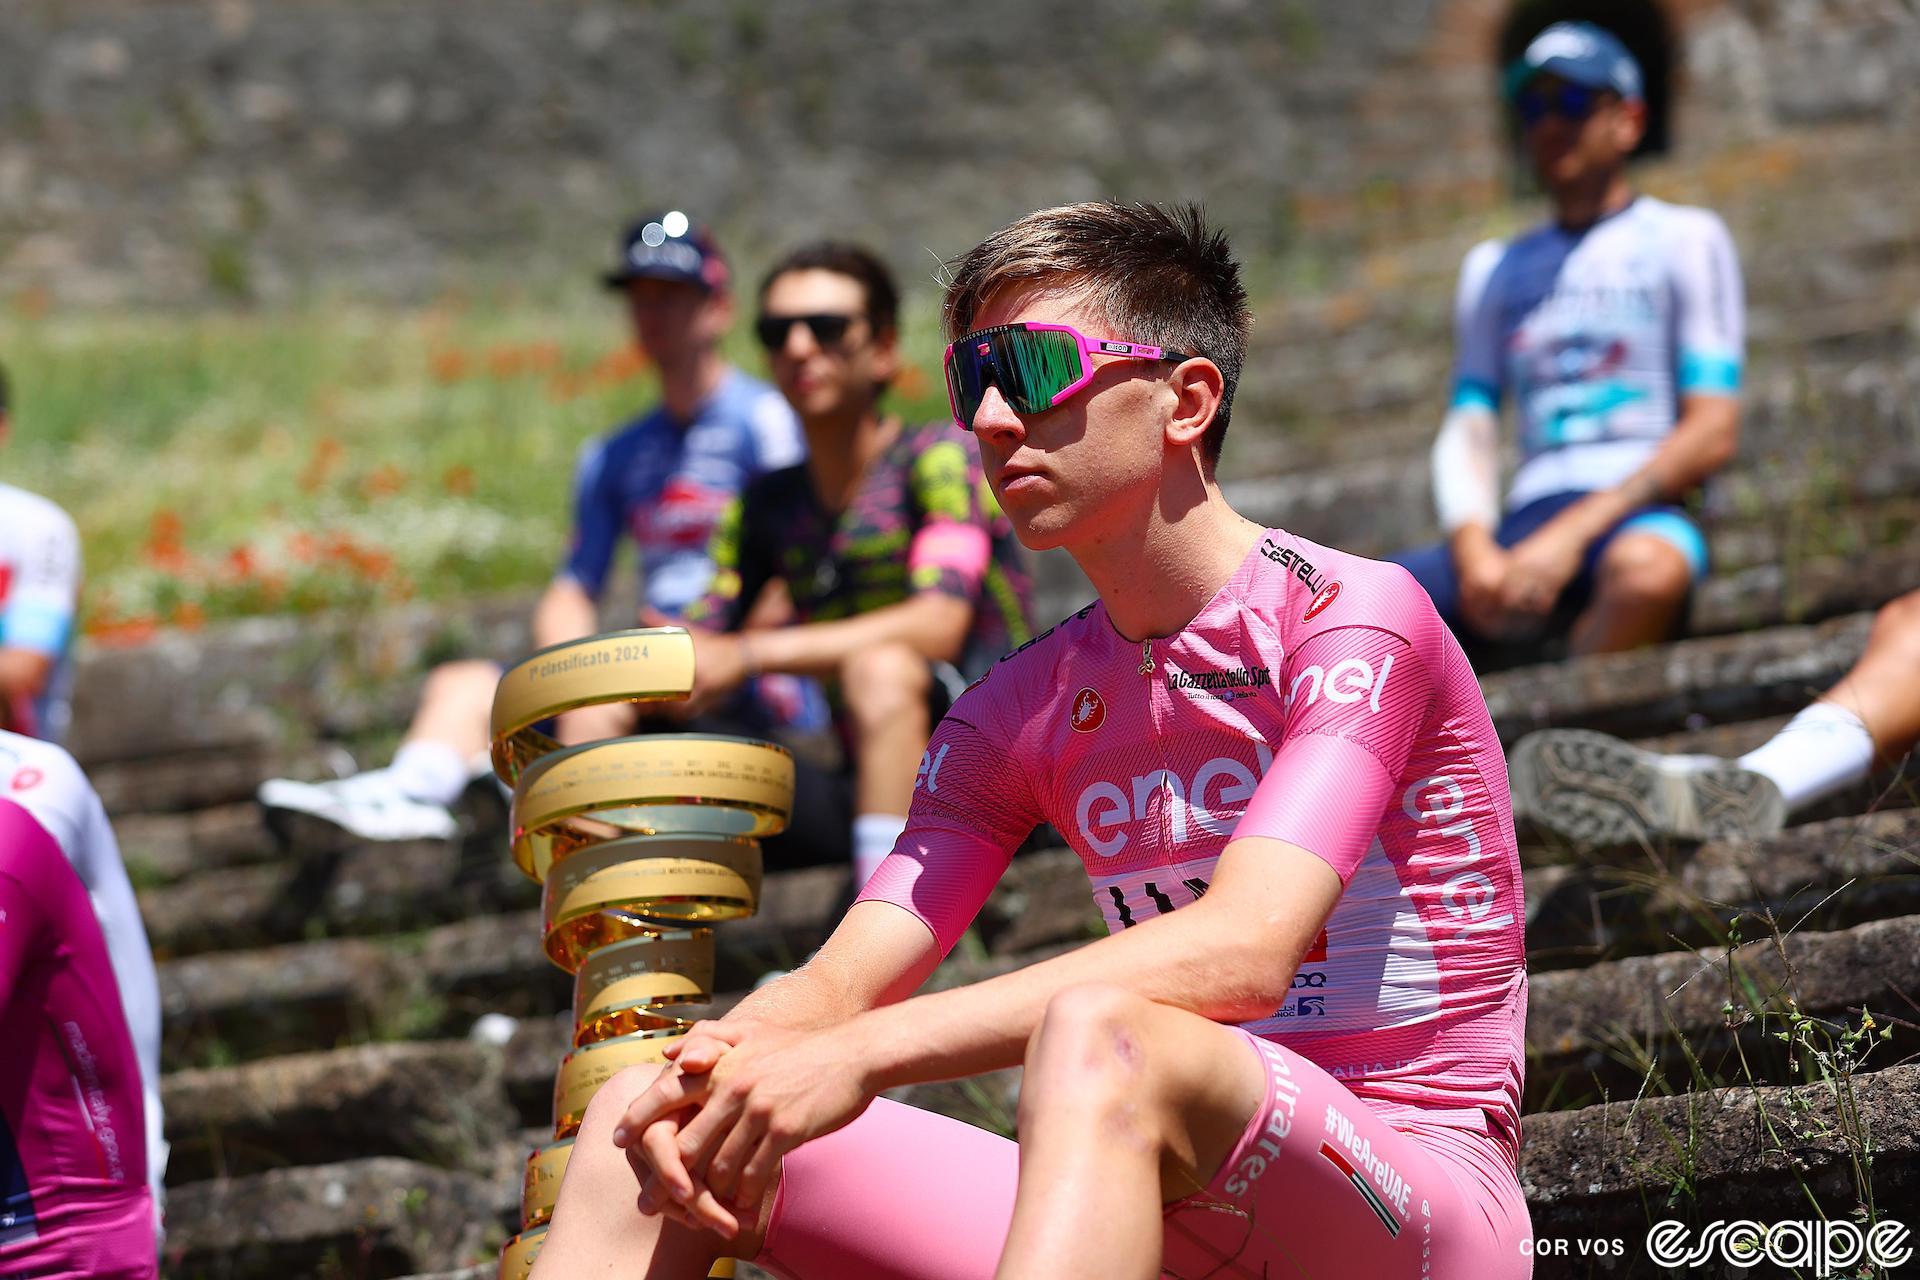 Tadej Pogačar sits on the stone steps of the Anfiteatro di Pompei, clad in a pink race suit of race leader for the Giro d'Italia. Other riders sit near but not next to him. Close by is the spiral trophy for the race's overall winner. He wears large sunglasses that cover most of an otherwise expressionless face.